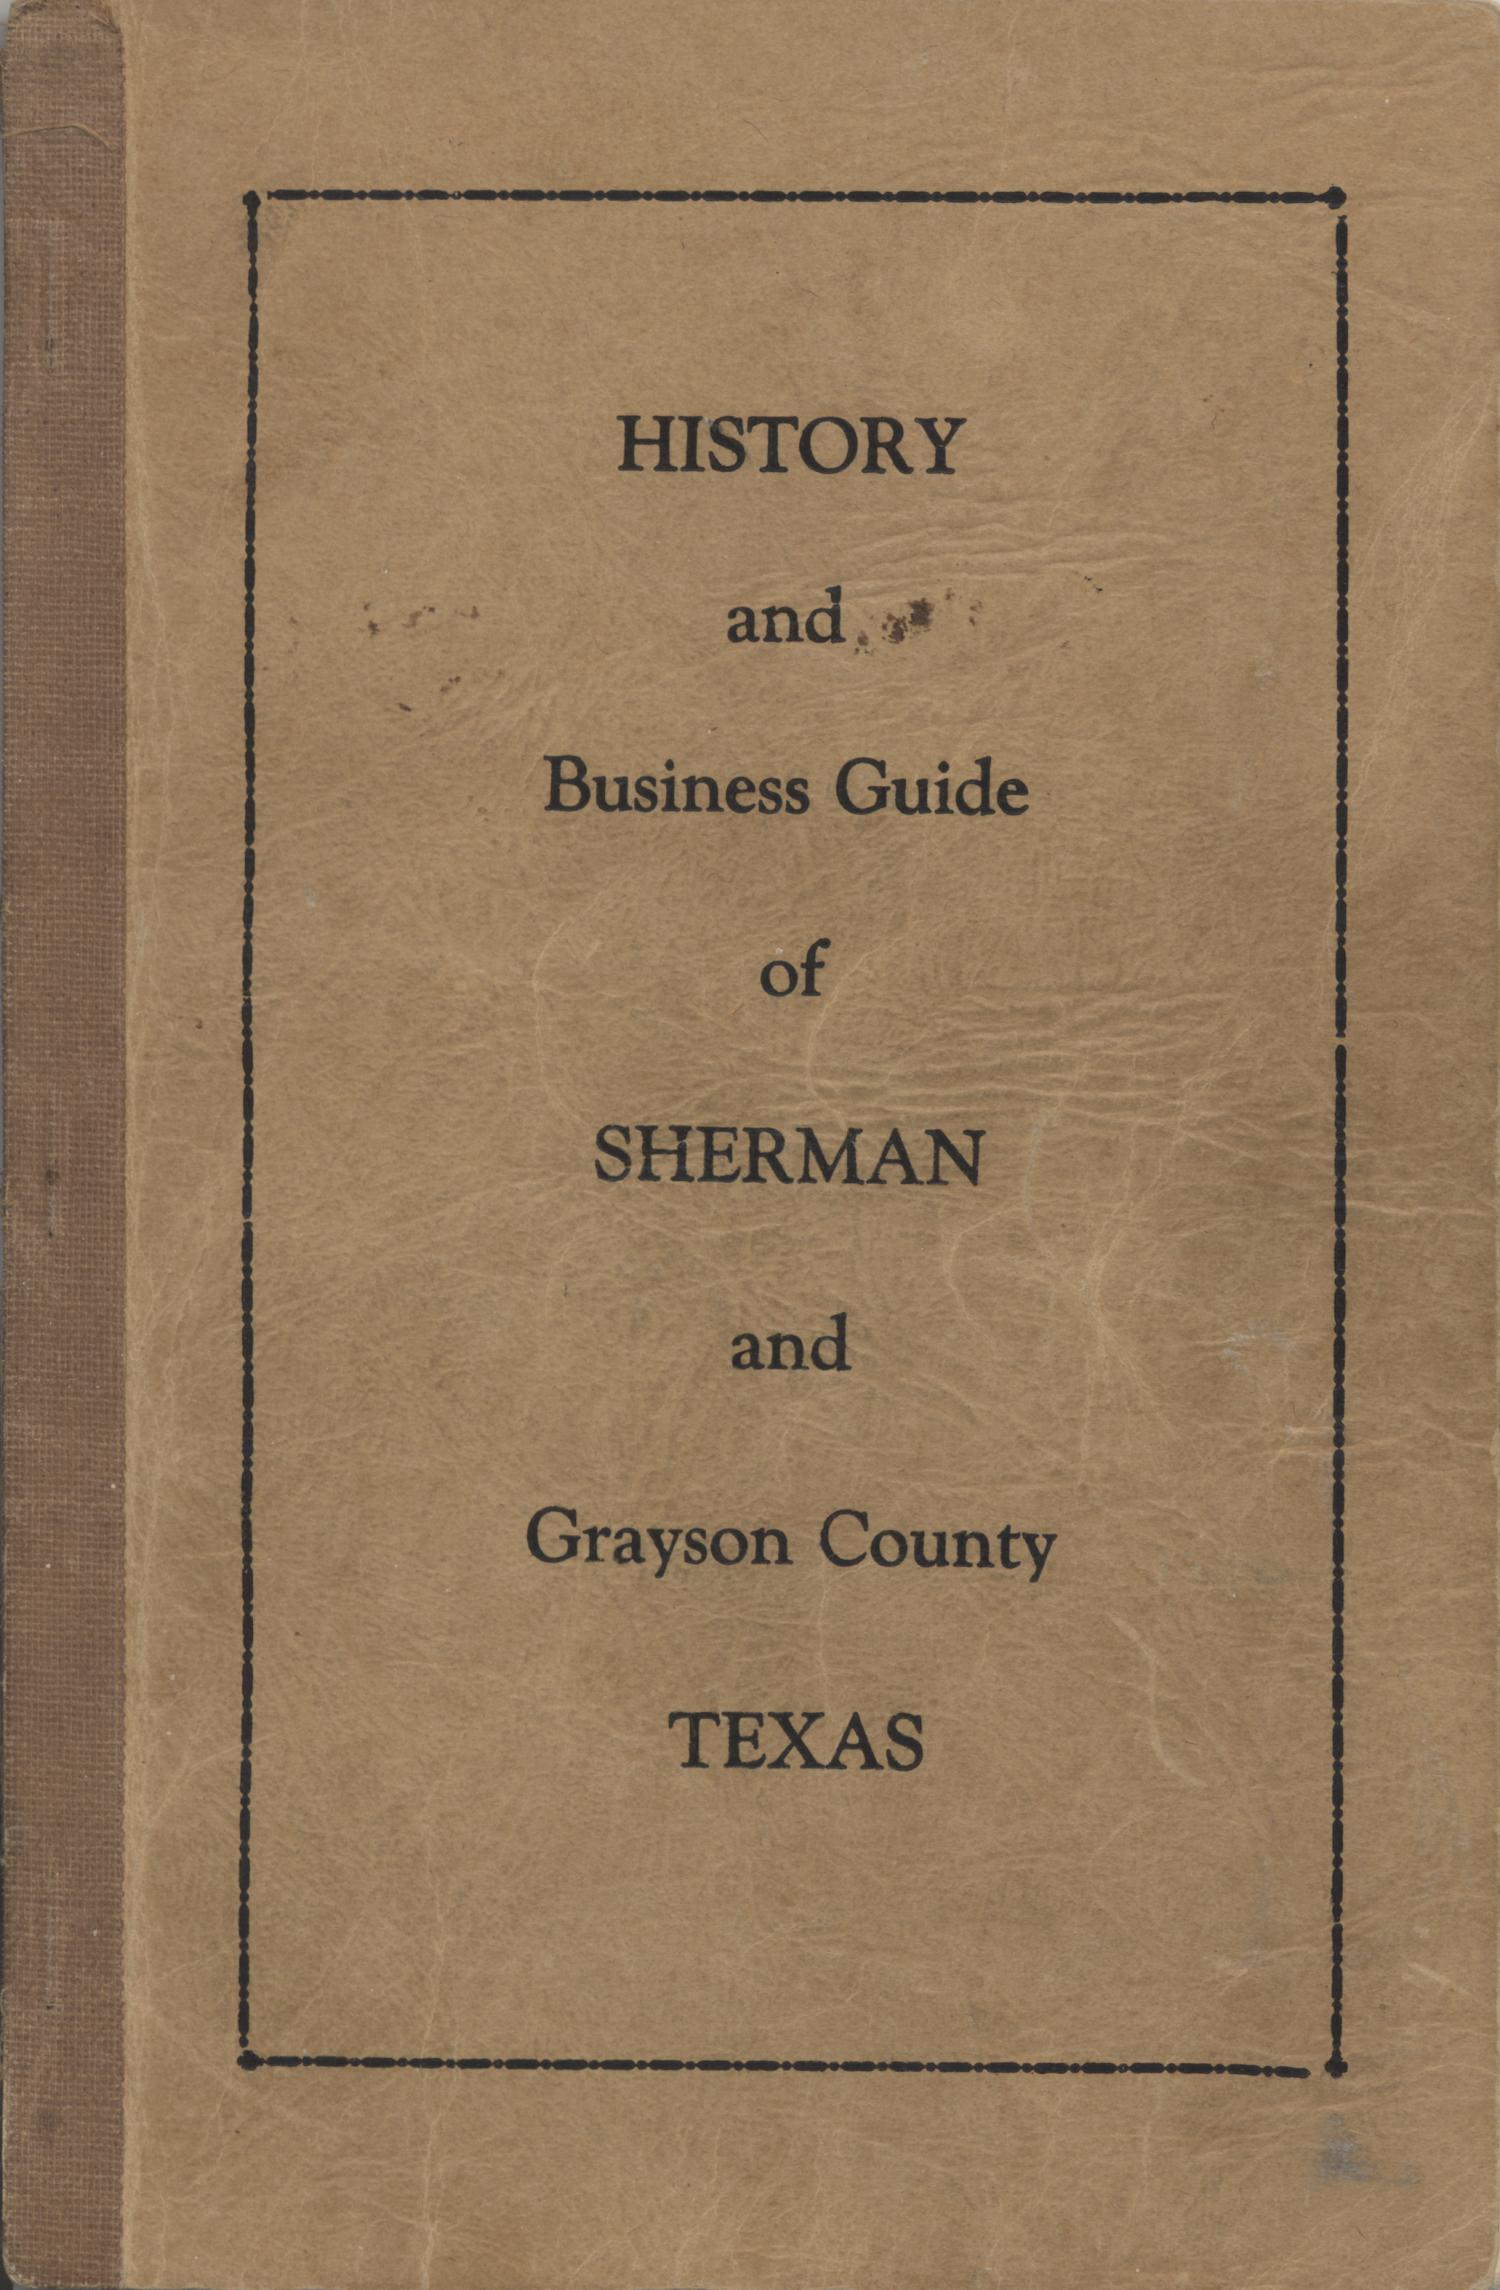 History and Business Guide of Sherman and Grayson County, Texas
                                                
                                                    Front Cover
                                                